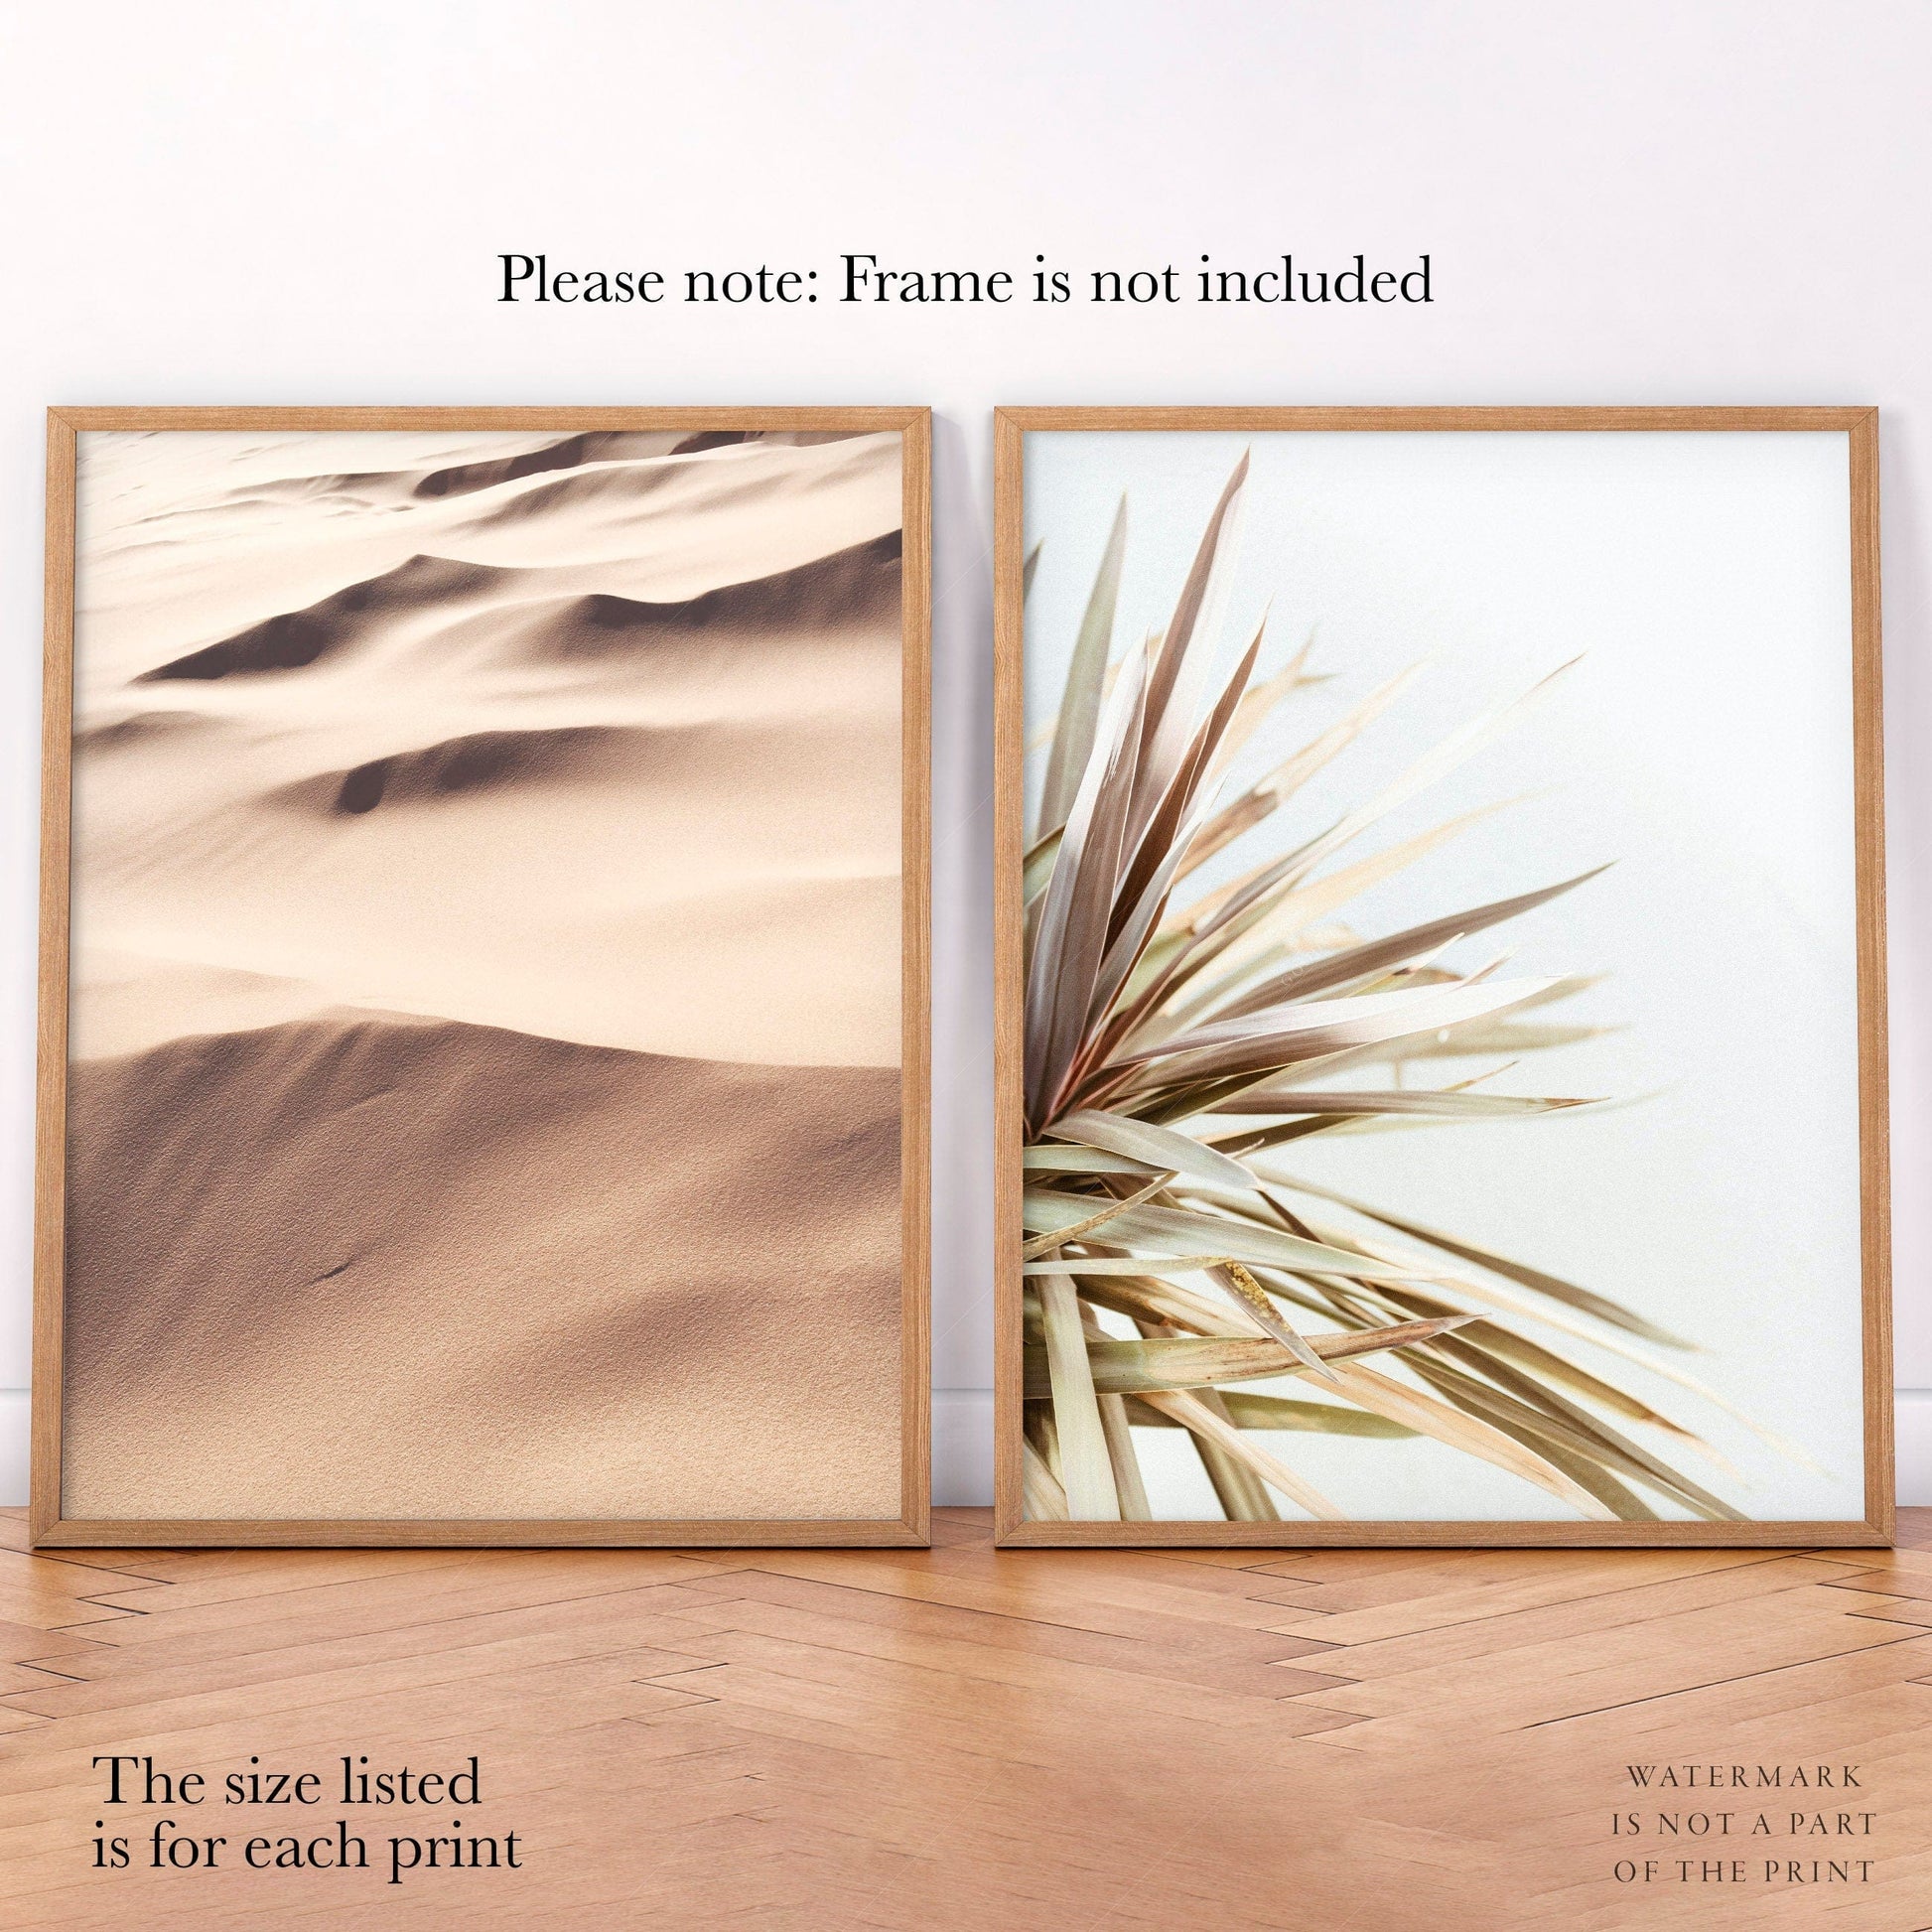 Home Poster Decor Set of 2 Neutral Wall Decor, Modern Abstract Prints, Beige Earth Tones, Leaves Leaf Photo, Desert Sand Poster, Nature Gallery Wall, Set of 2, 0-2